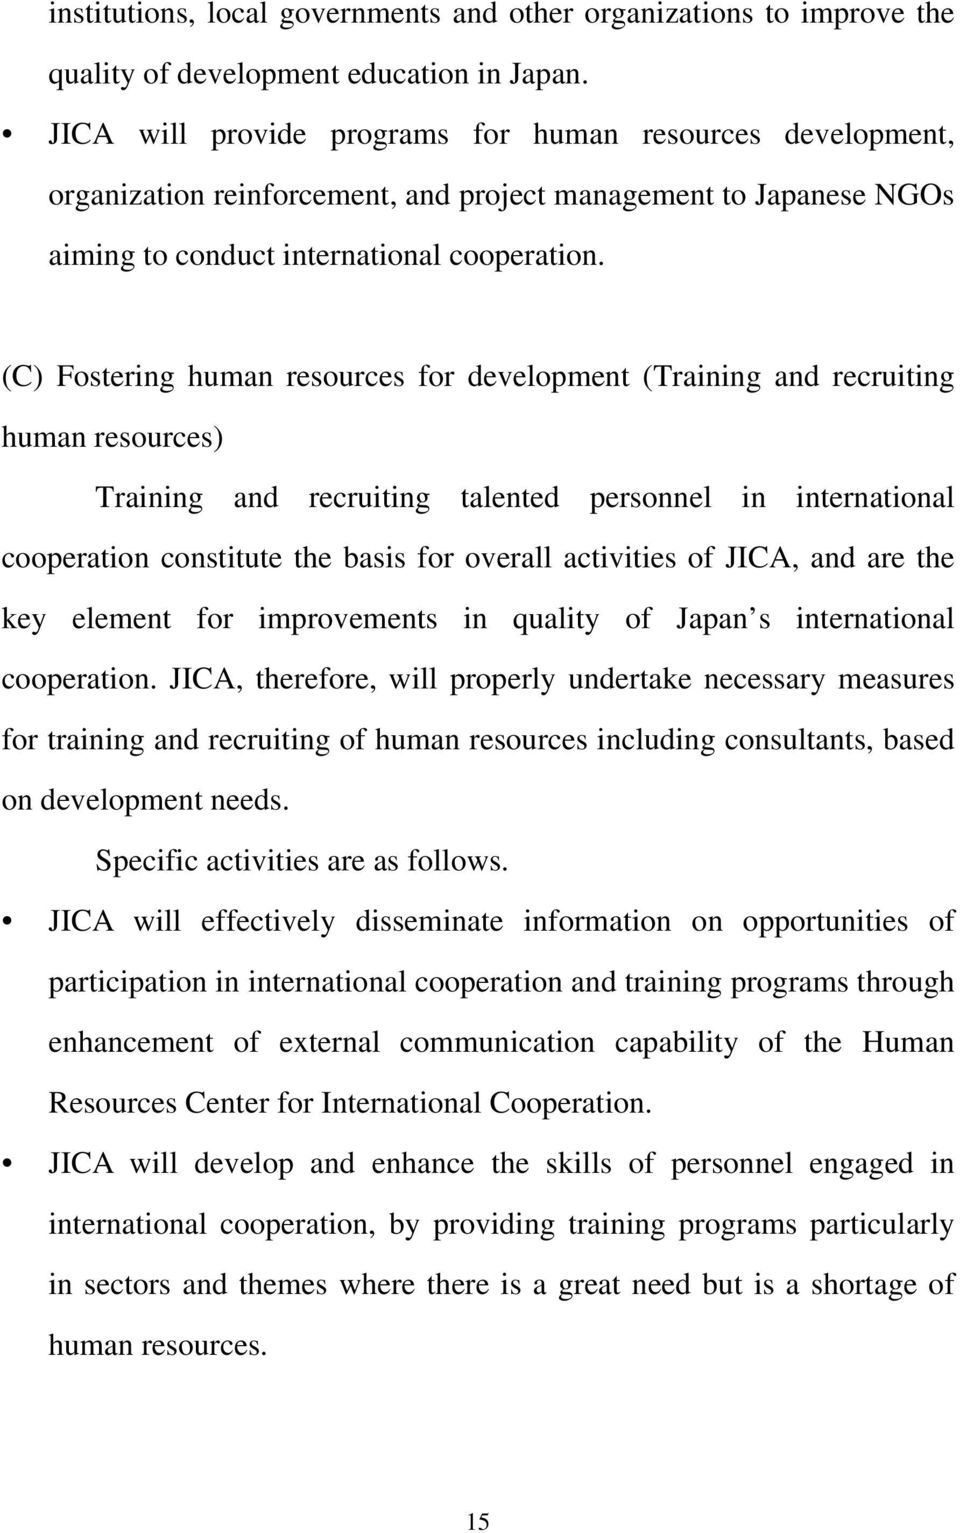 (C) Fostering human resources for development (Training and recruiting human resources) Training and recruiting talented personnel in international cooperation constitute the basis for overall